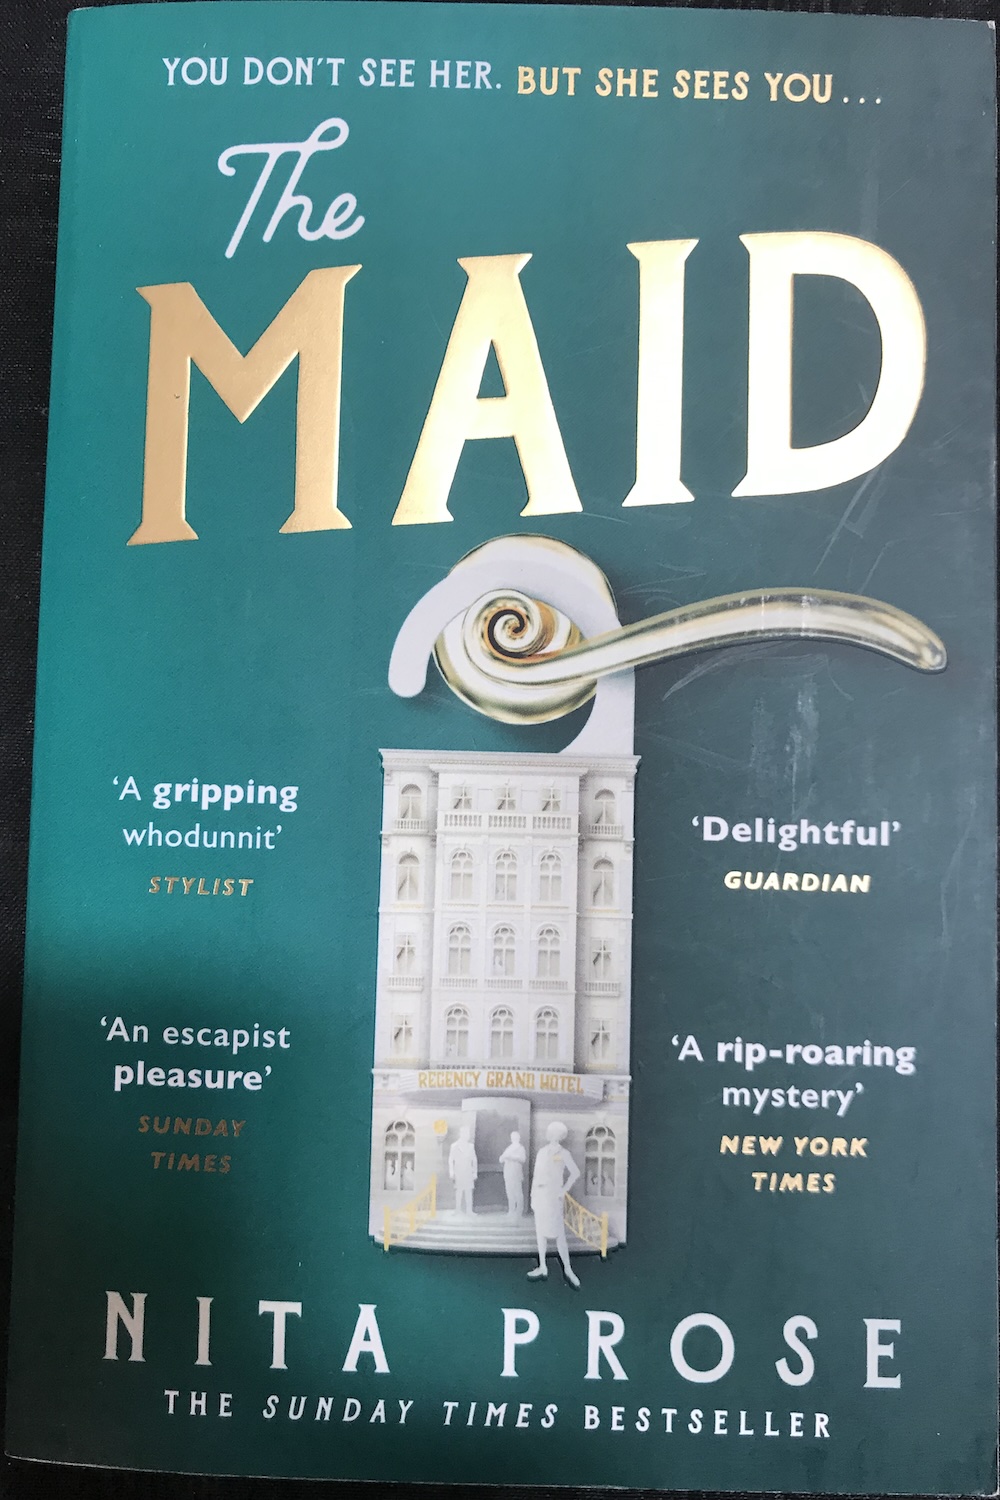 Book　Nita　By　Prose　Preloved　Shop　The　Maid